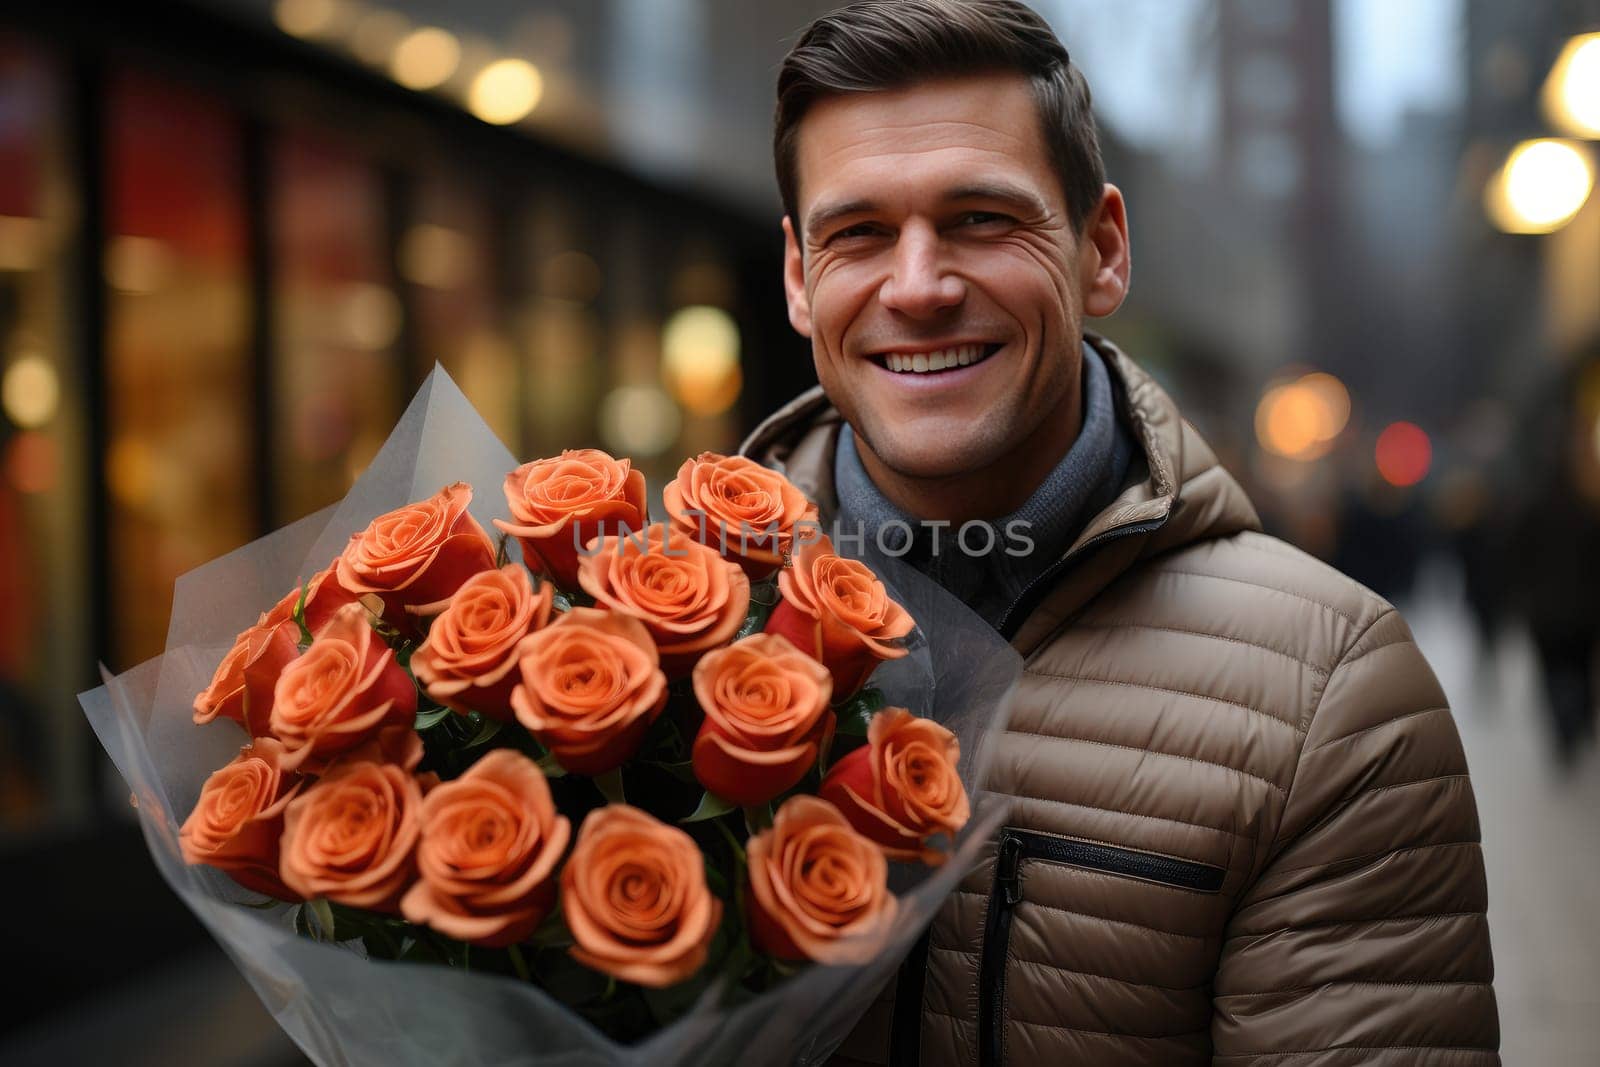 Valentine's Day portrait: smiling man holding bouquet of delicate pink roses. by Yurich32